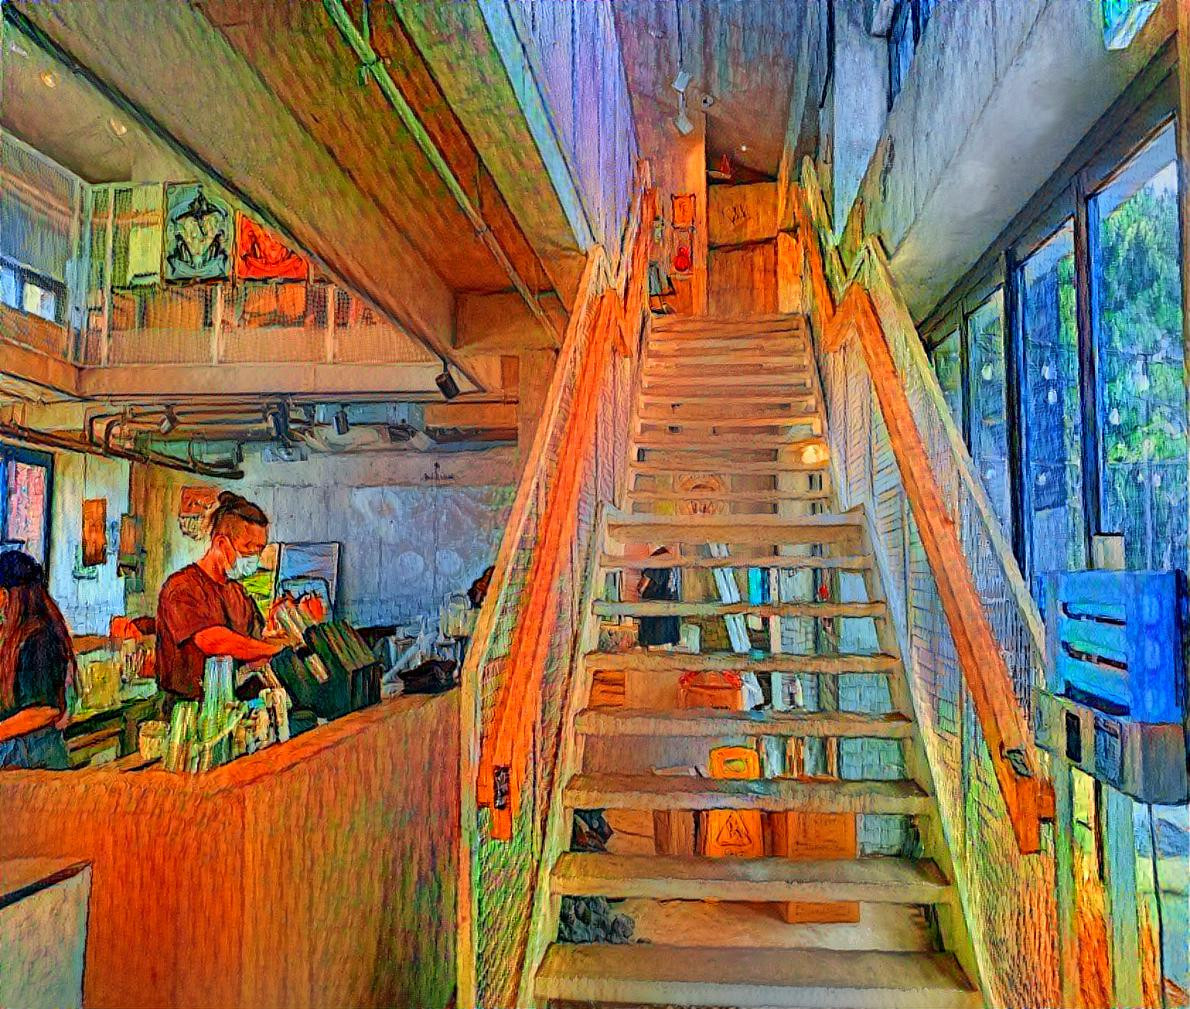 Stair in a cafe